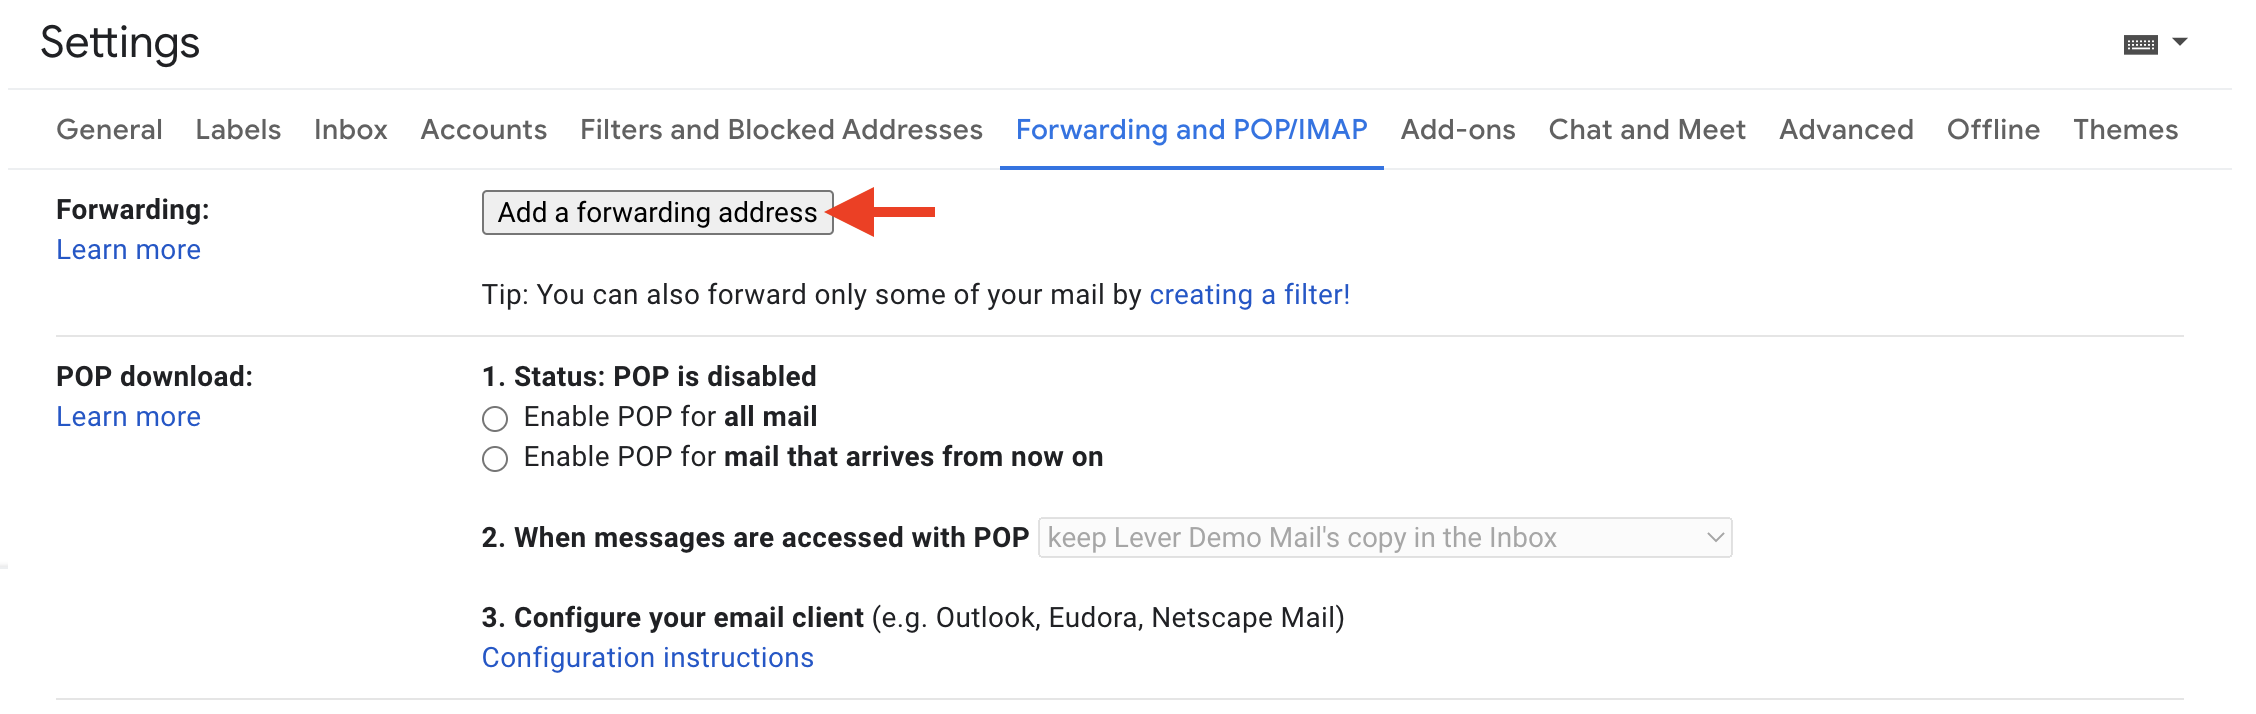 Forwarding and POP/IMAP section of Gmail settings with arrow pointing to Add a forwarding address button.